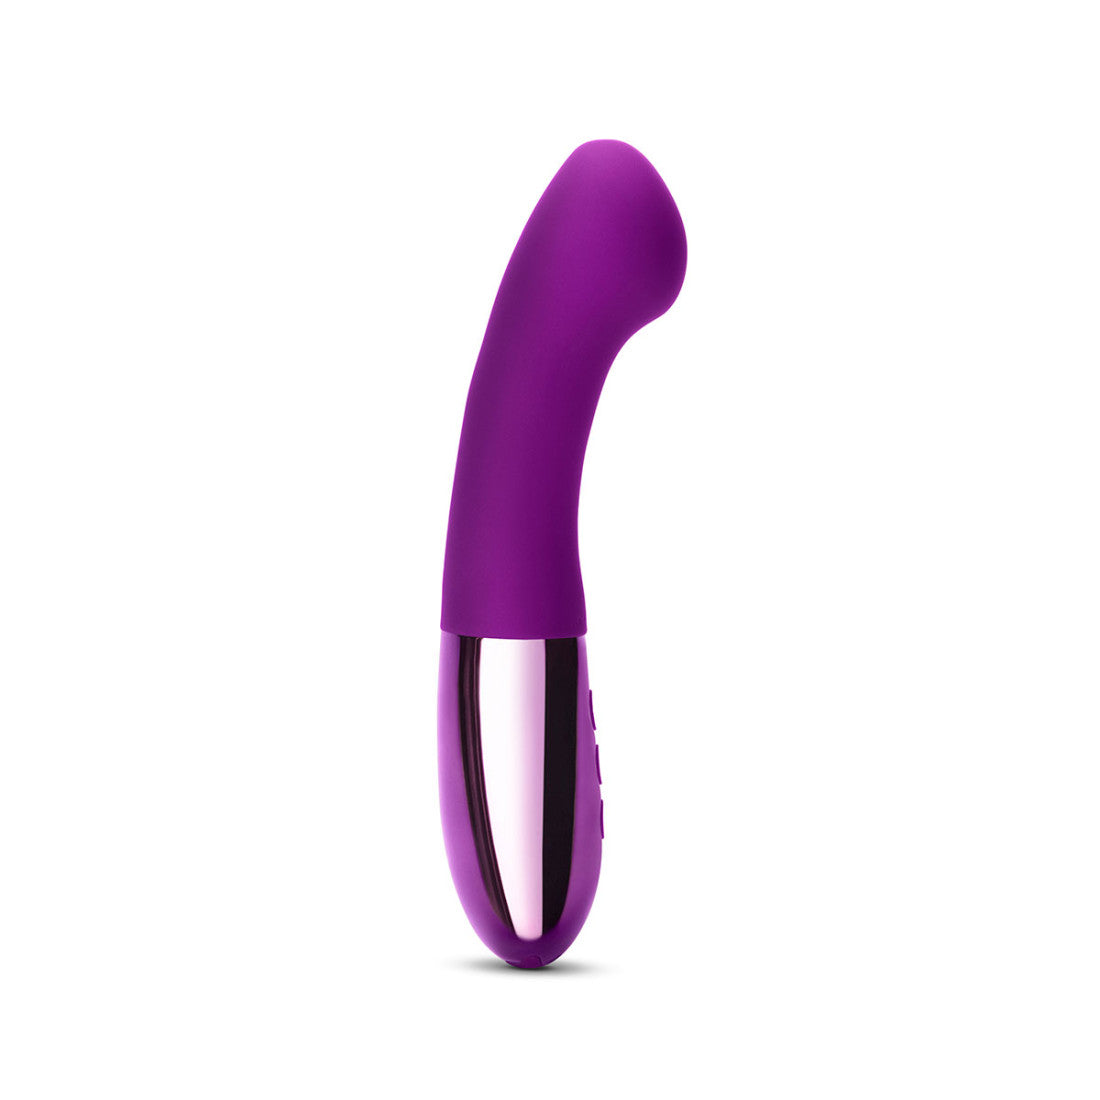 Le Wand Gee - Women's Vibrating Massager 